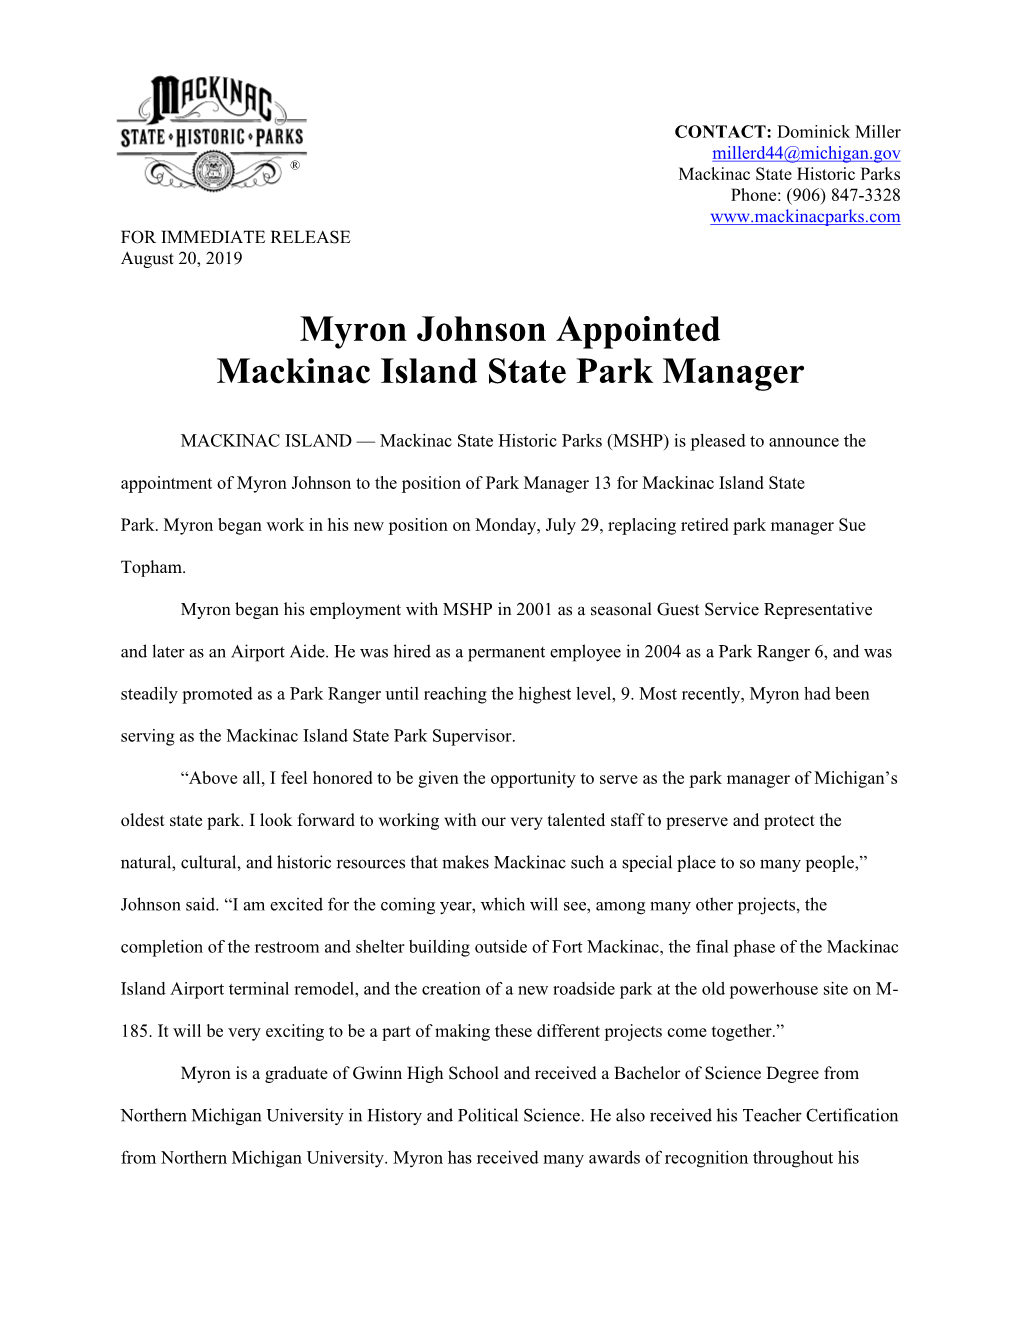 Myron Johnson Appointed Mackinac Island State Park Manager